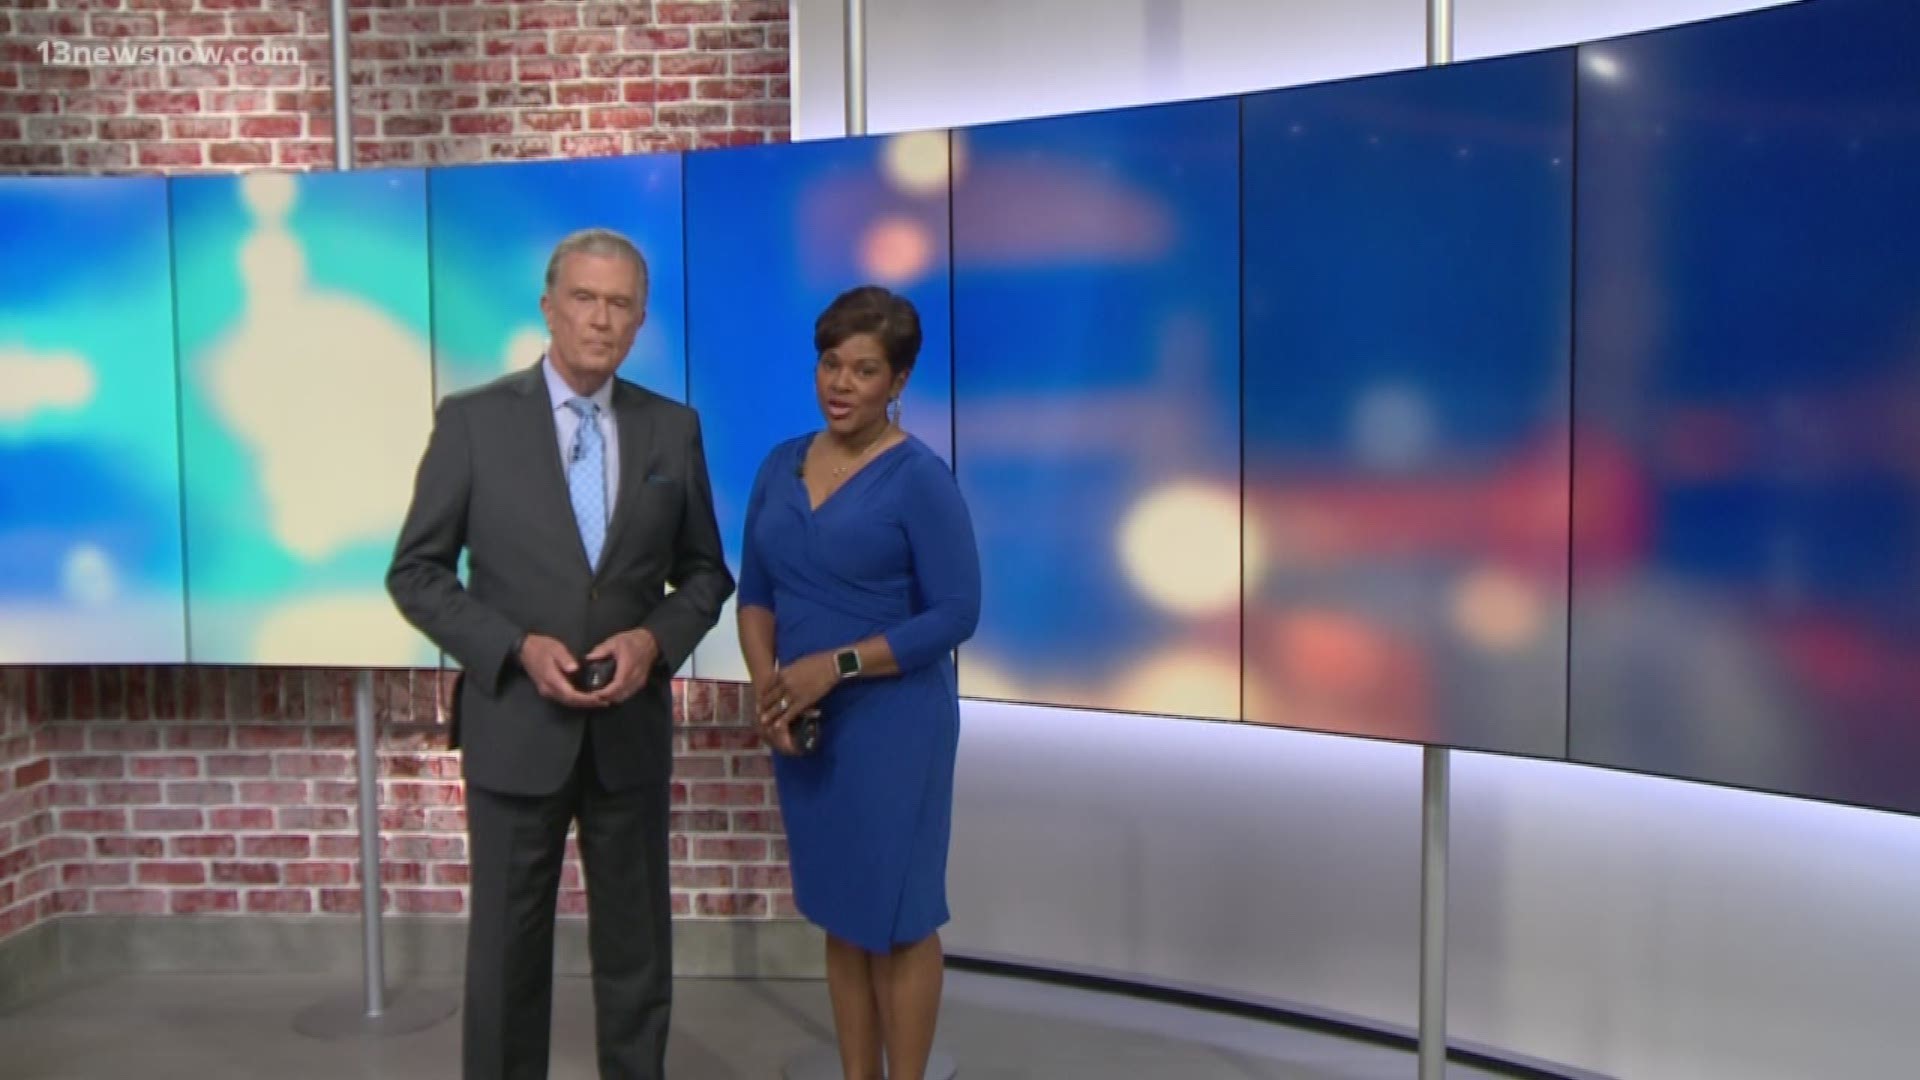 13News Now top headlines at 11 p.m. with Nicole Livas and David Alan for April 22.